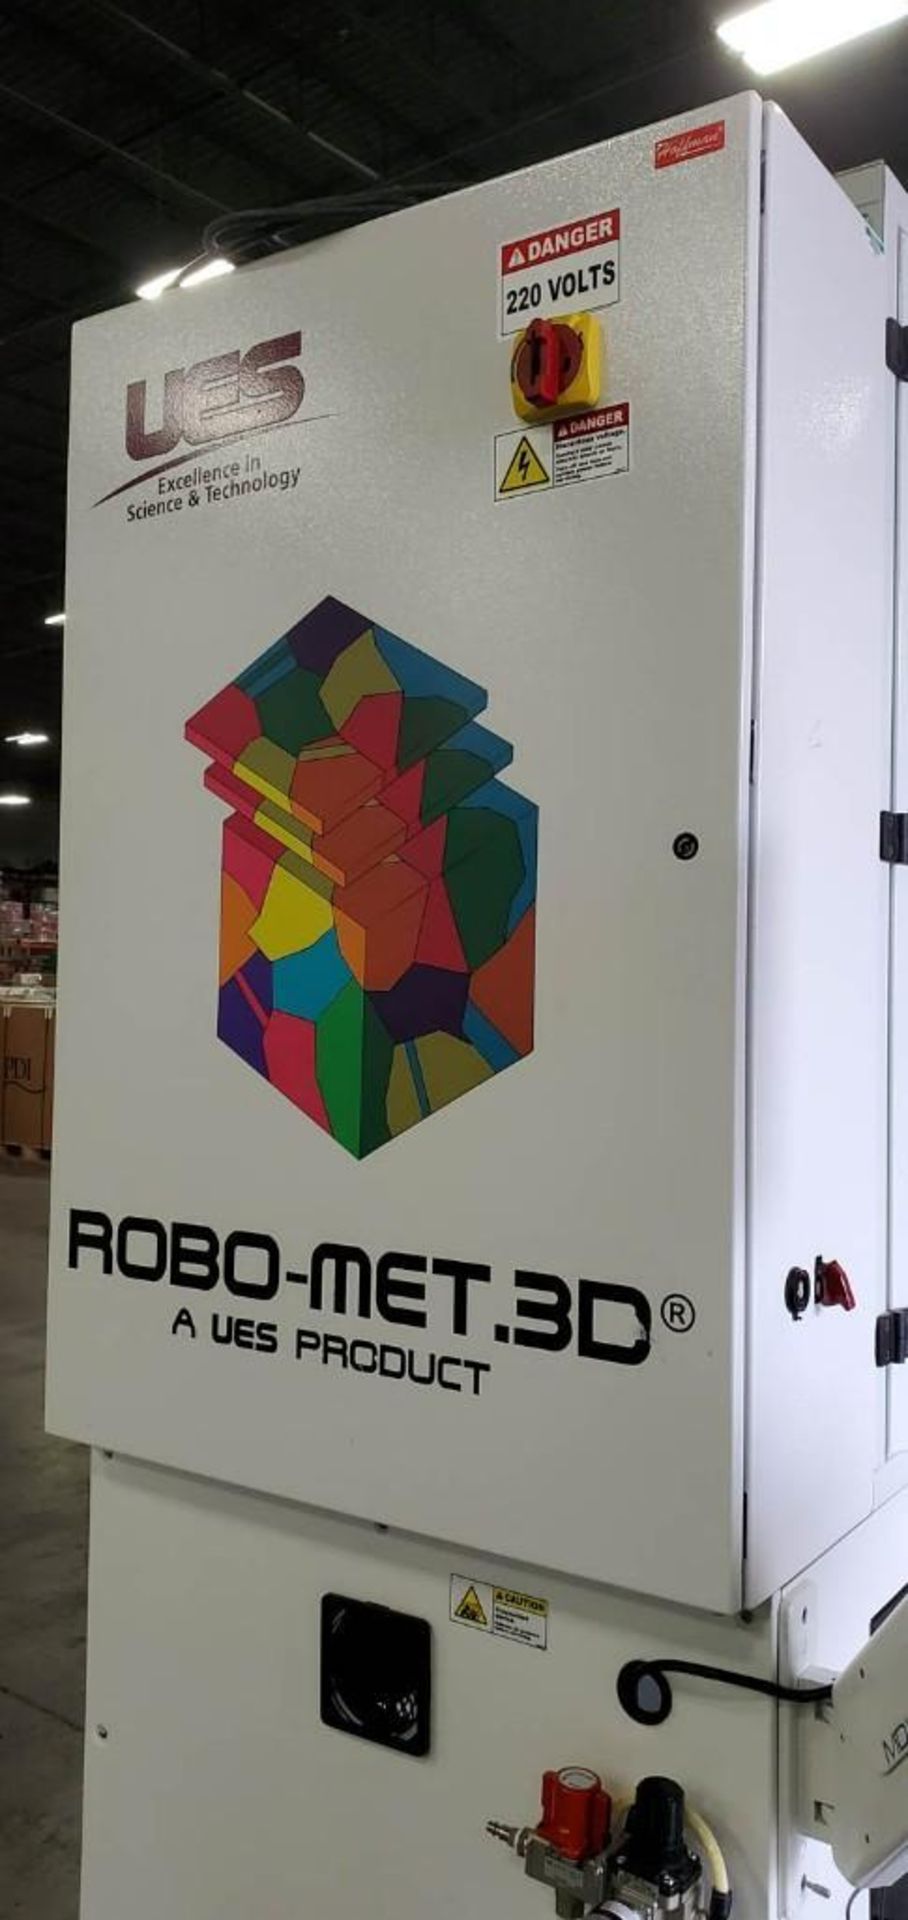 2013 UES Model Robomet 3D Automated Robotic Metallographic Preparation and 3D Photo System - Image 18 of 53